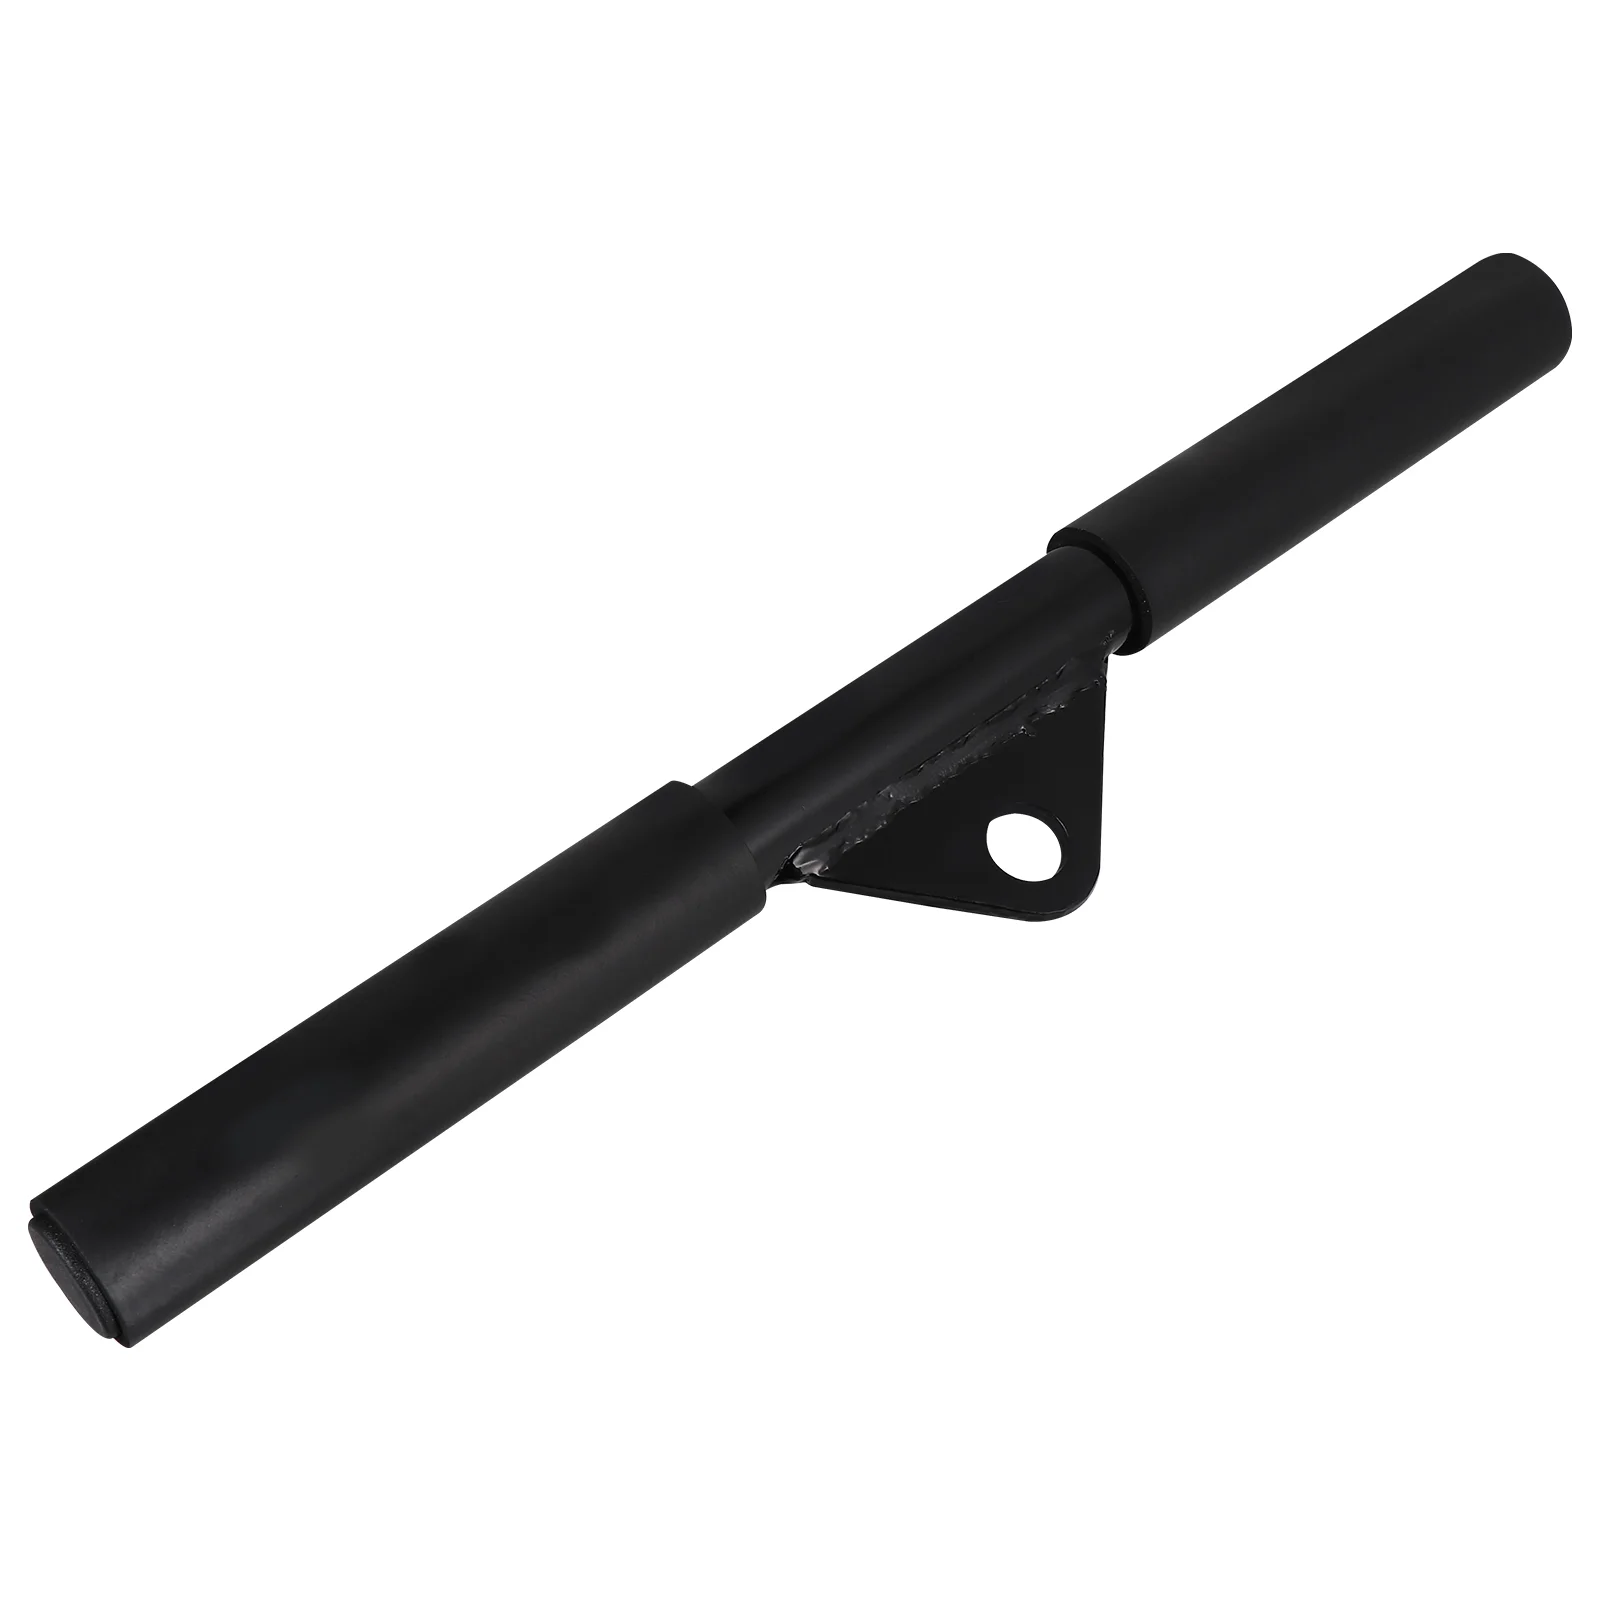 

Steel Tension Rod Tension Bar Practical Tension Lever Strength Training Tool